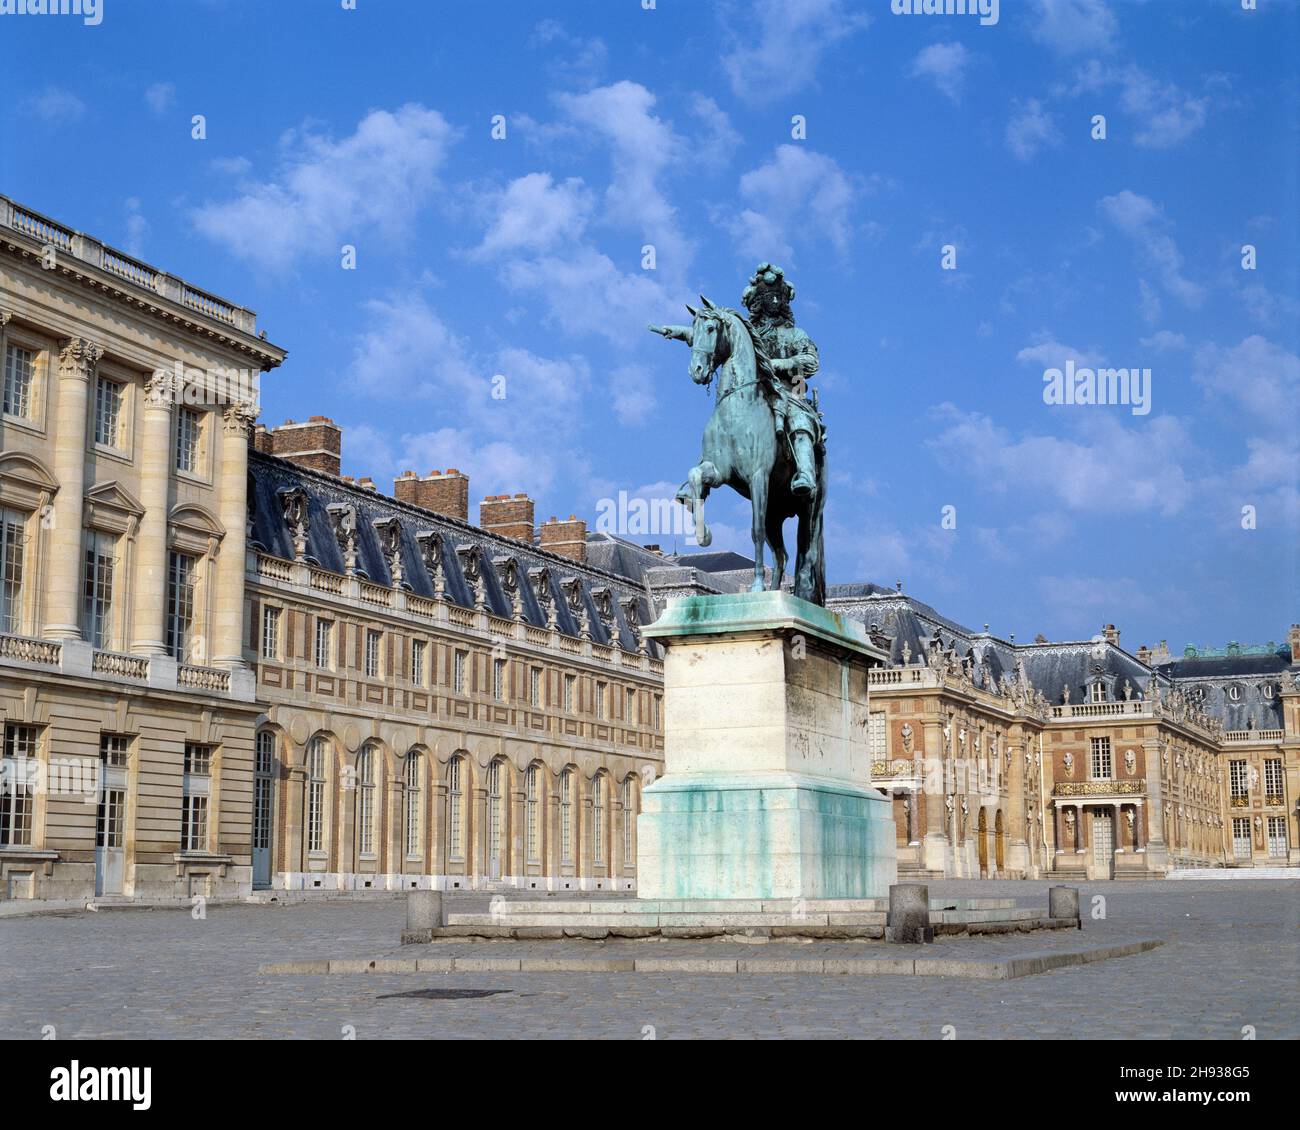 France. Near Paris. Palace of Versailles. Equestrian statue of King Louis XIV. Stock Photo